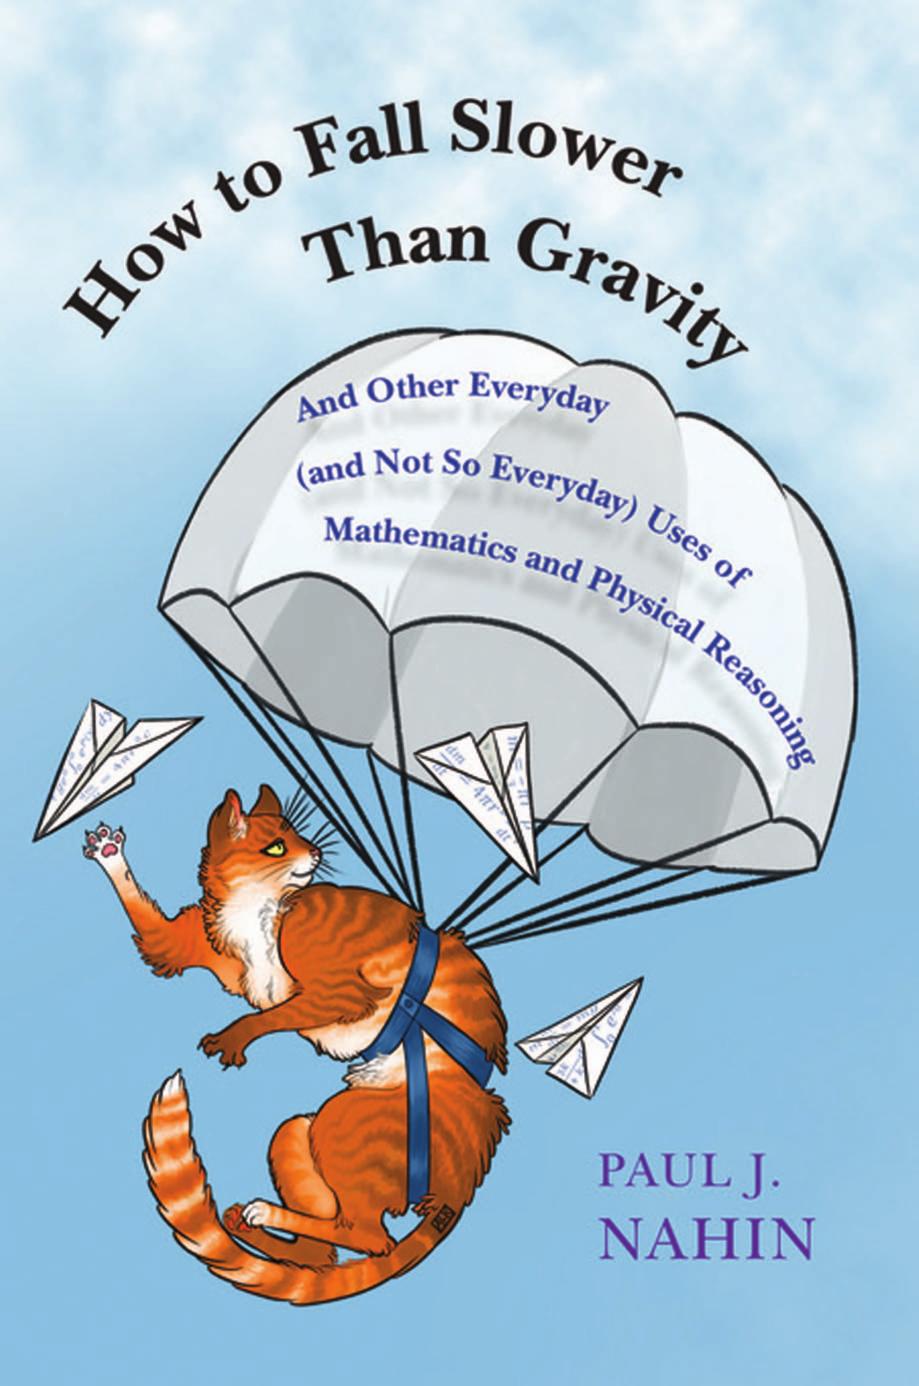 How to Fall Slower Than Gravity: And Other Everyday Uses of Mathematics and Physical Reasoning